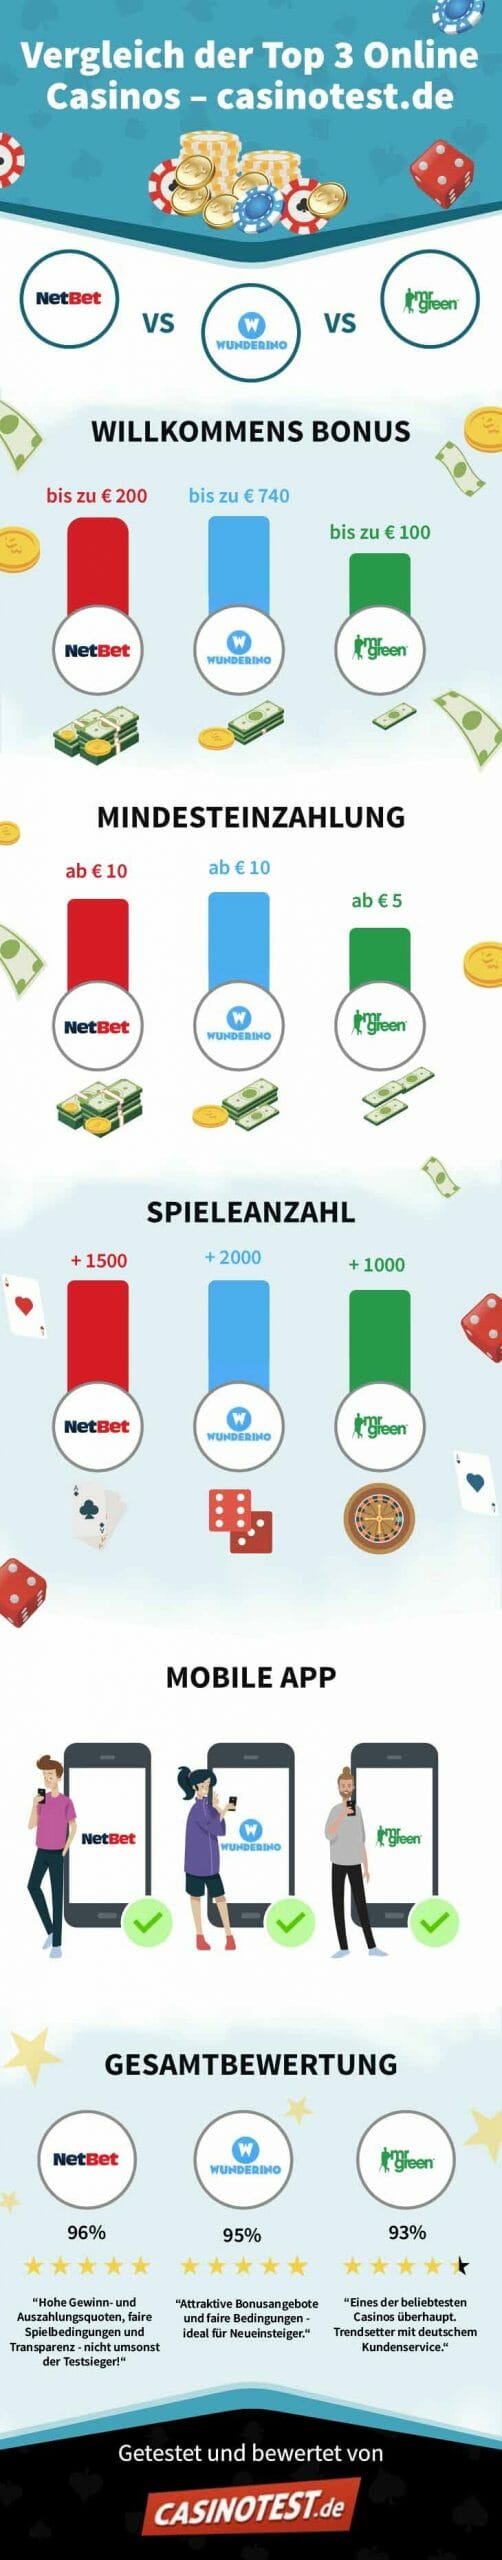 infographie-top-3 casinos-comparaison-scaled